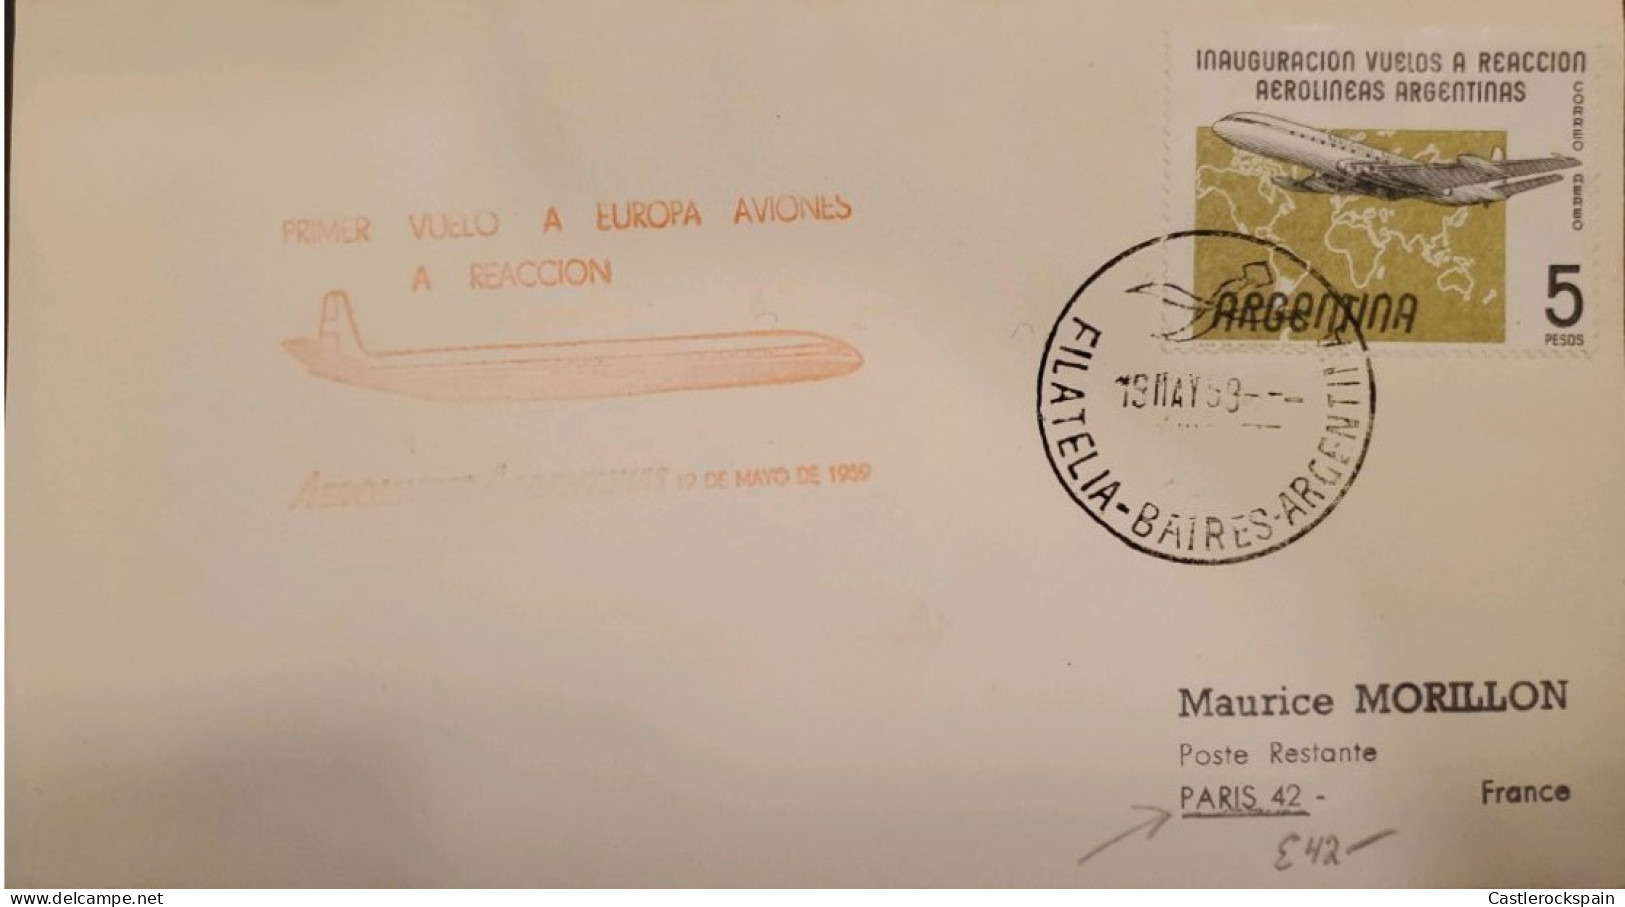 MI) 1958, ARGENTINA, FIRST FLIGHT TO EUROPE CANCELLATION, FROM BUENOS AIRES TO PARIS - FRANCE, AIR MAIL, XF - Gebraucht